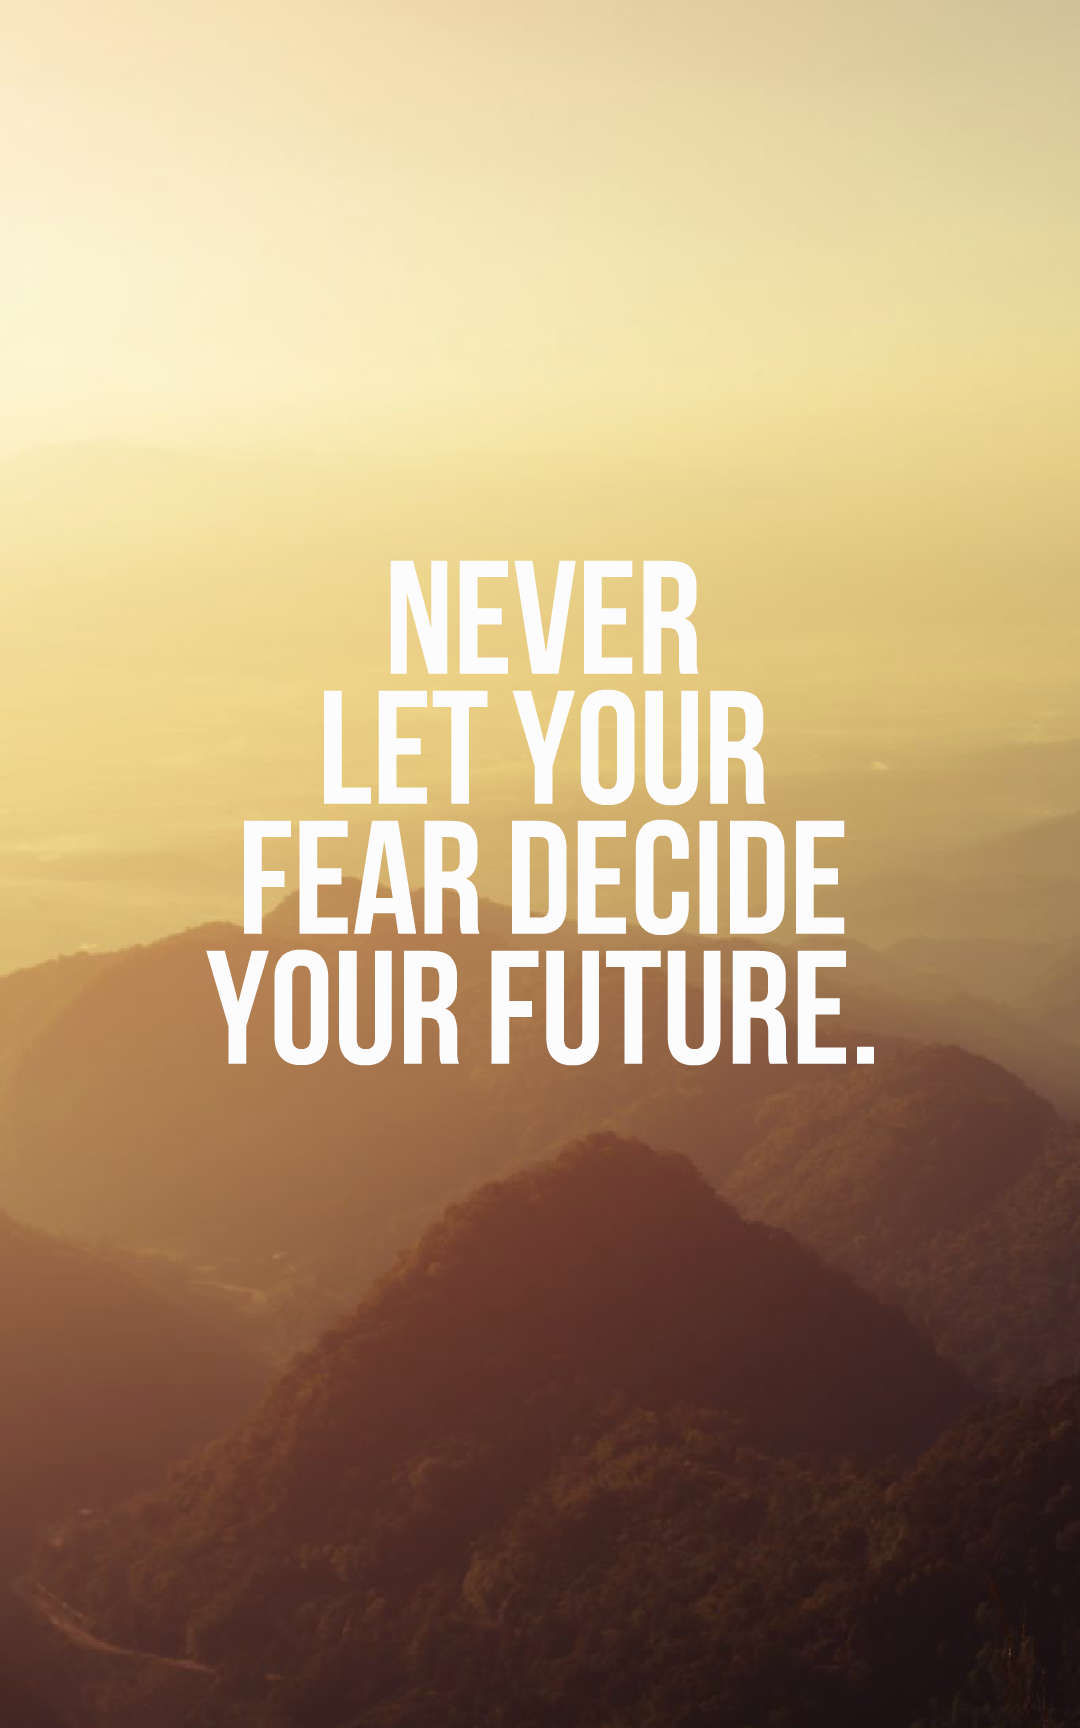 Never let your fear decide your future